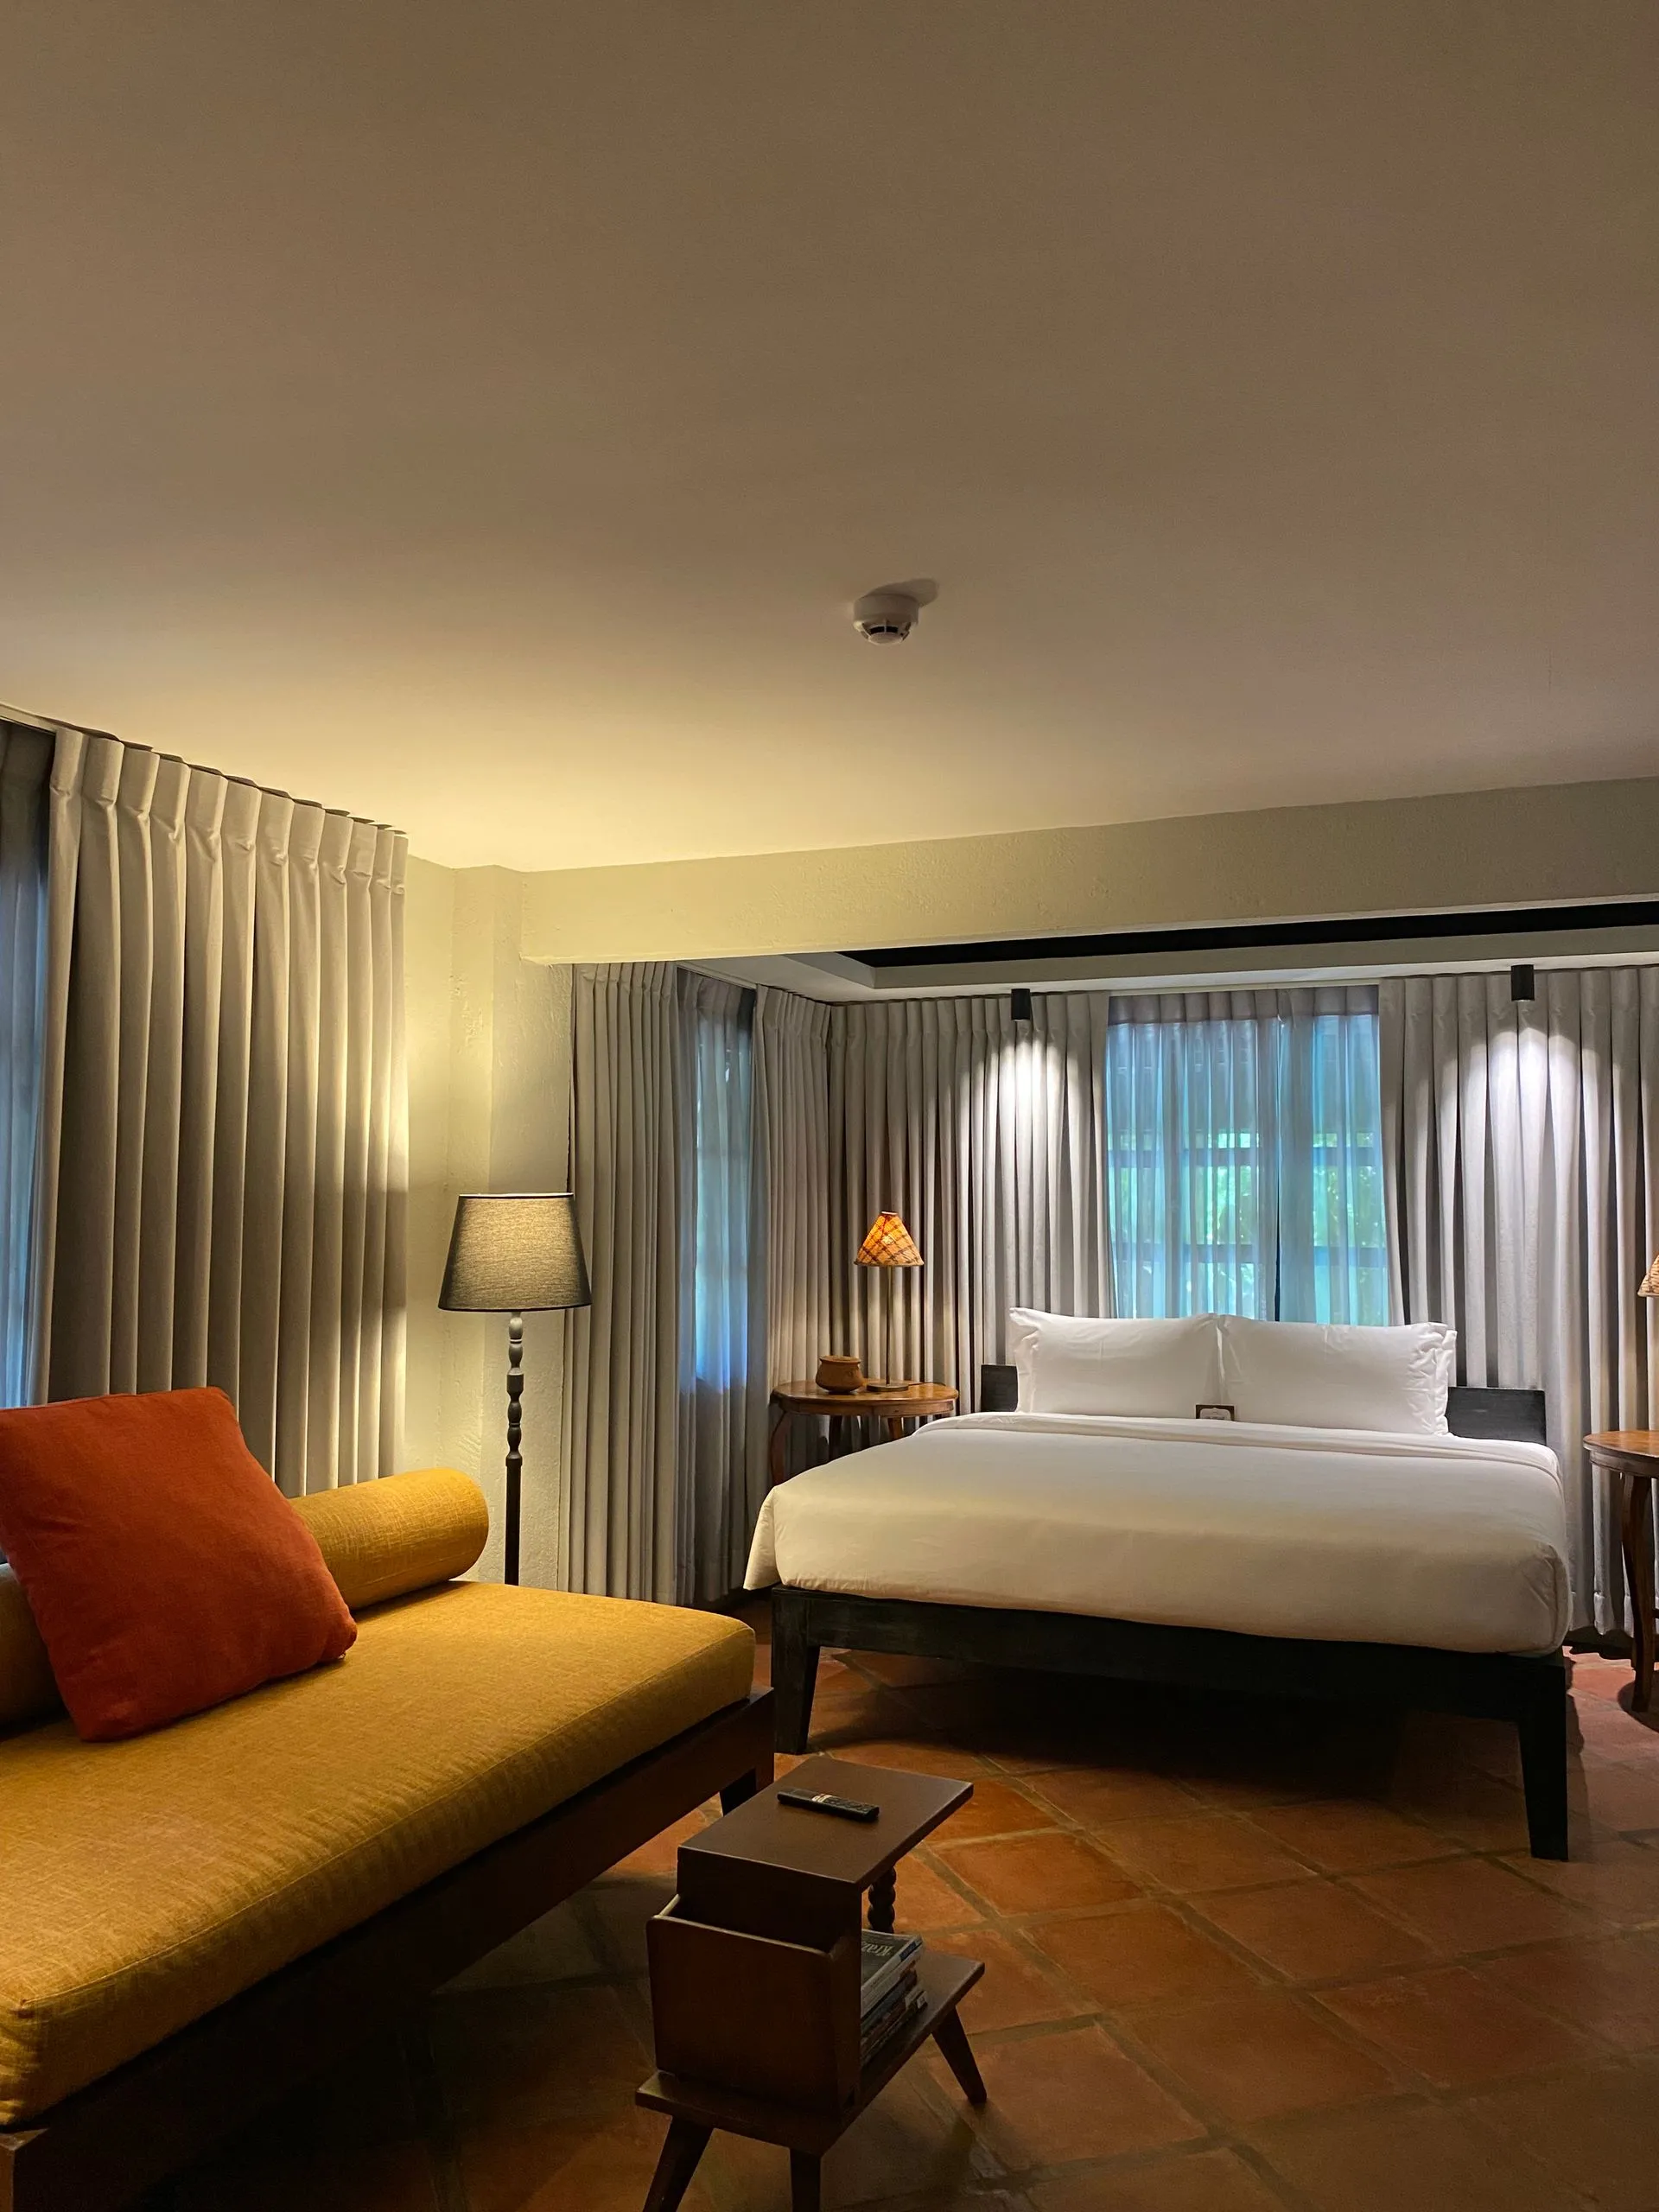 Warm and inviting guest room at The Henry Resort Boracay, a boutique hotel in Boracay, showcasing a plush bed with bright orange accents, elegant drapery, and a relaxed seating area.